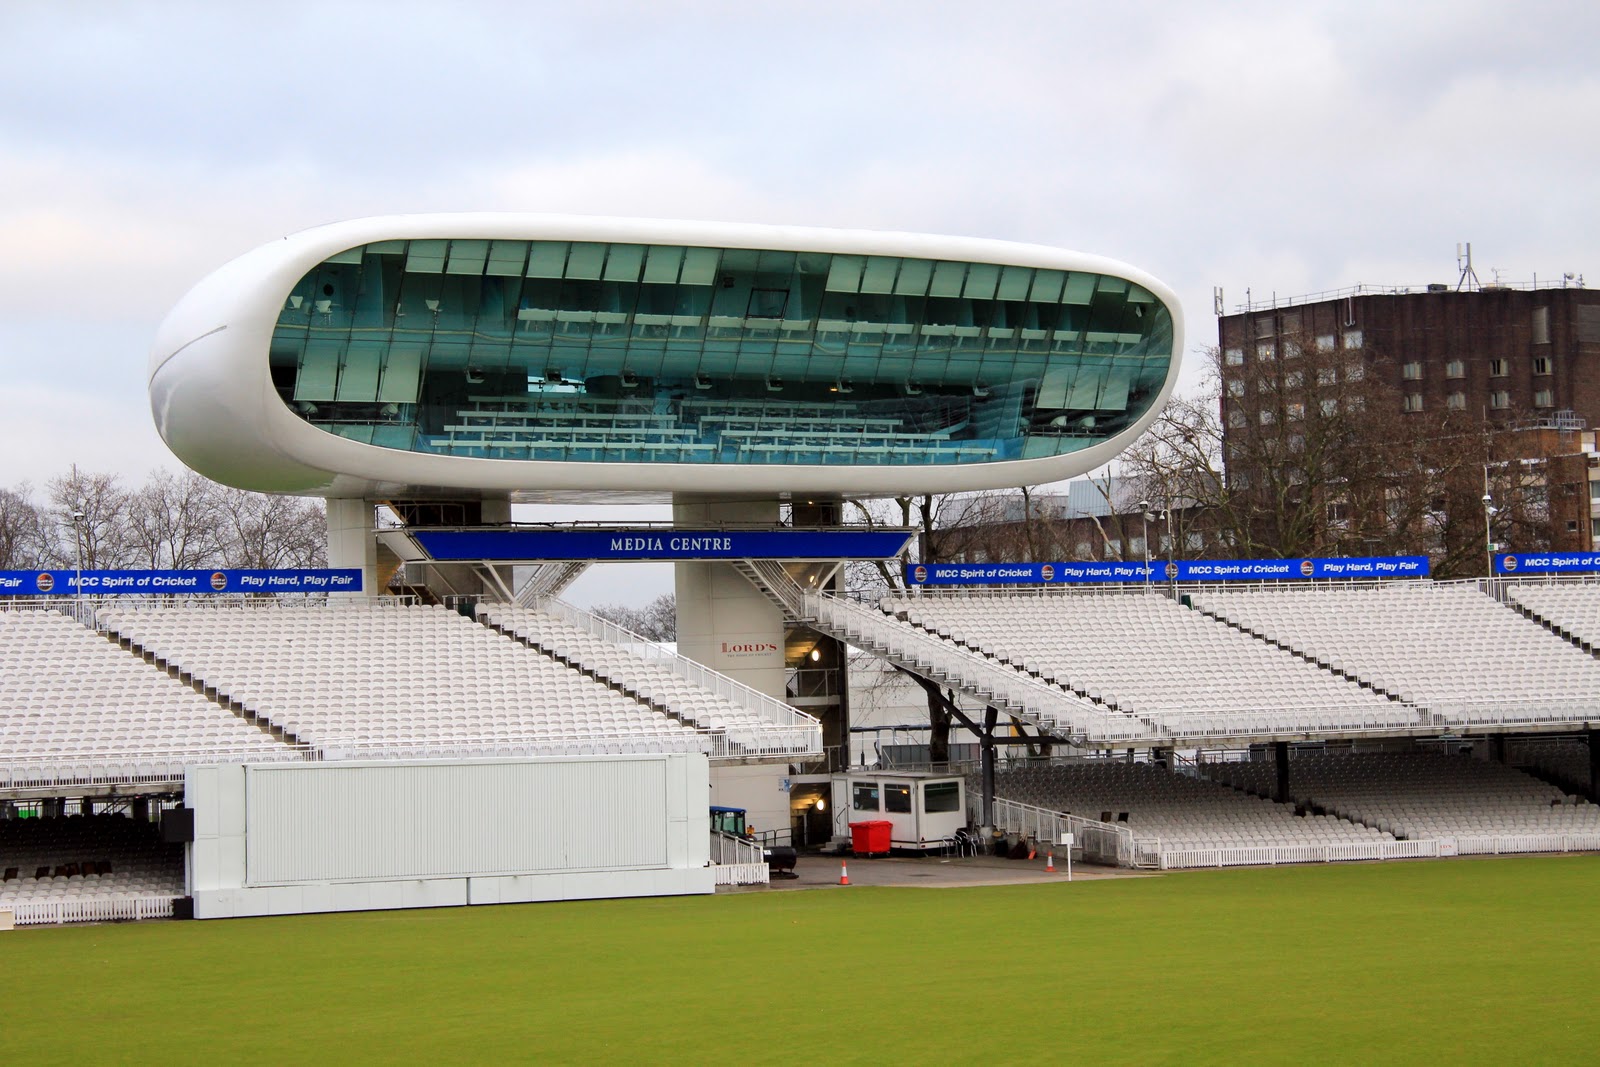 An Architectural Pilgrimage: Lord's Cricket Ground